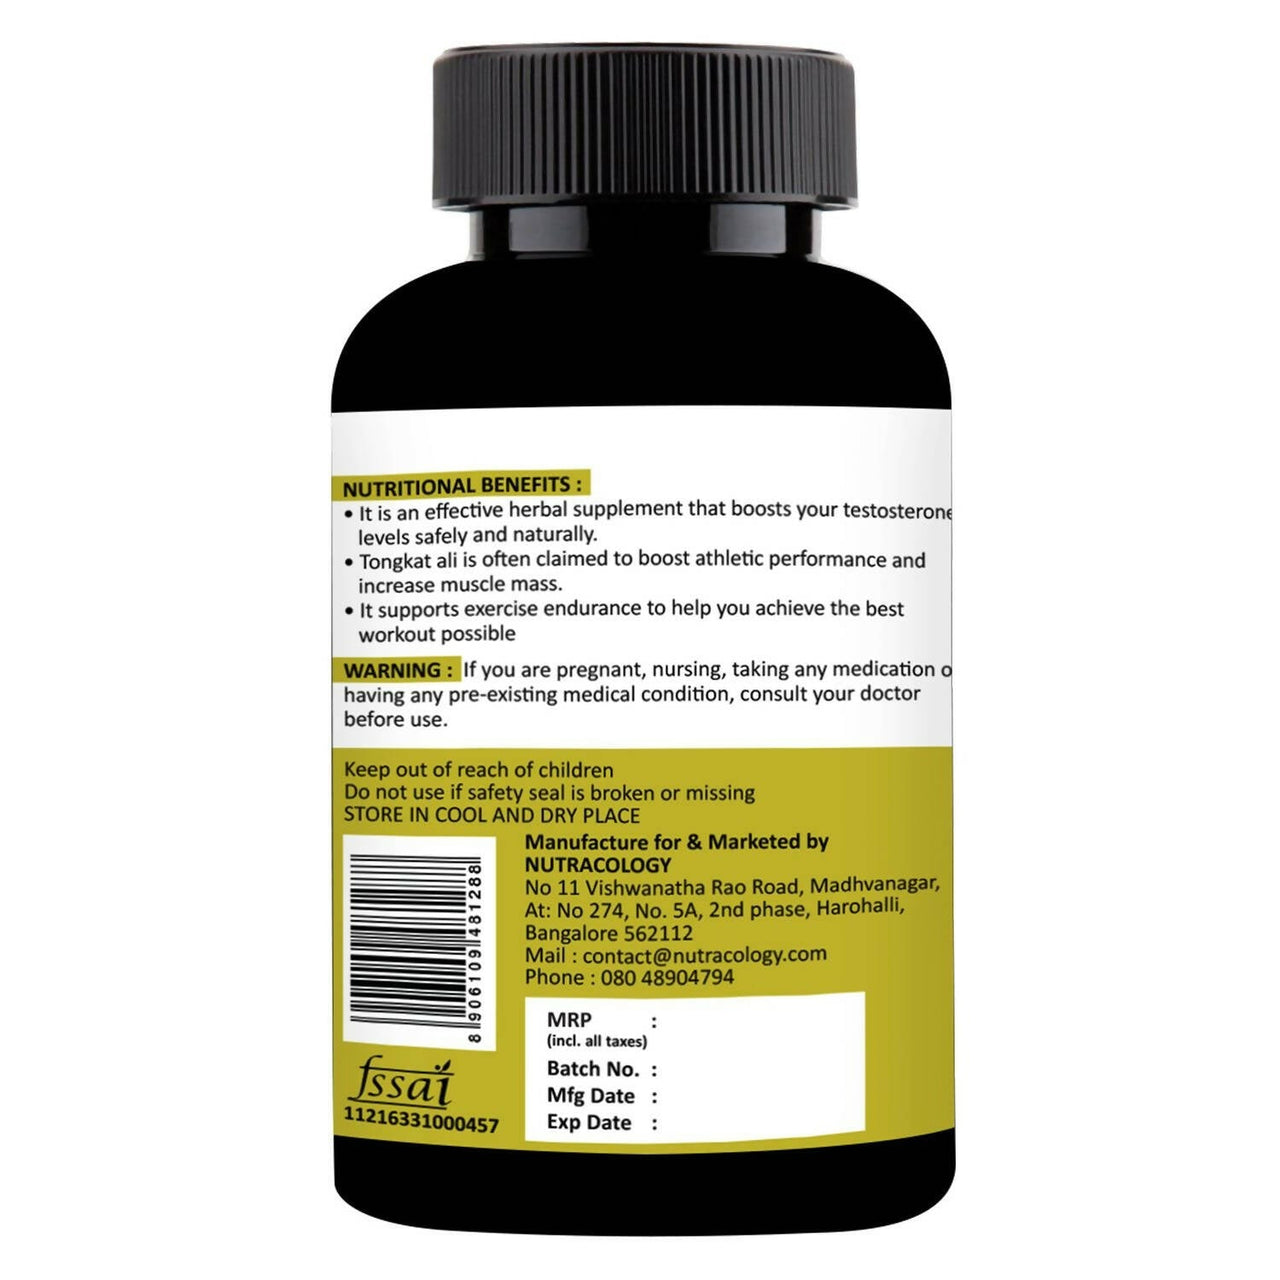 Nutracology Tongkat Ali Testosterone Booster For Stamina Energy and Endurance Tablets - Distacart